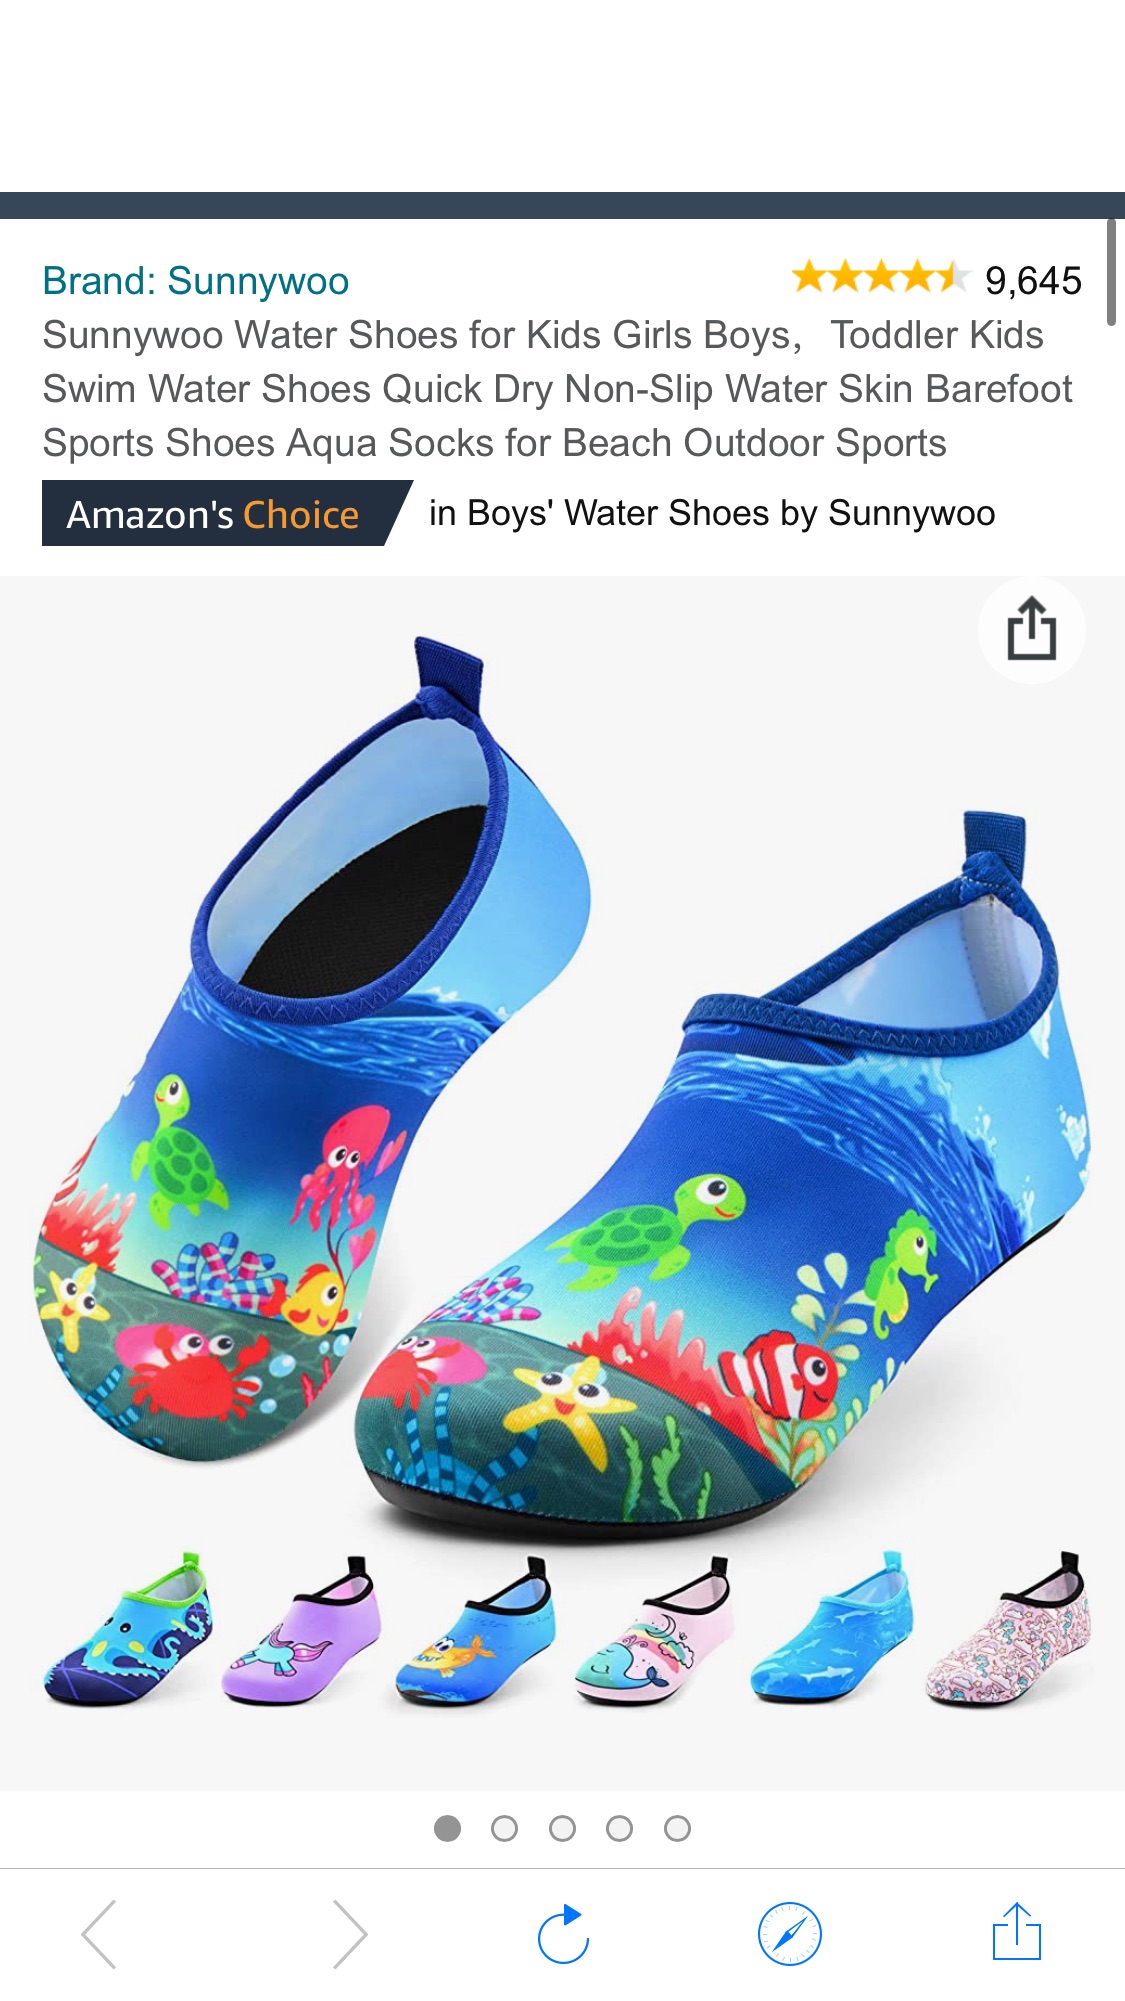 Sunnywoo Water Shoes for Kids Girls Boys,Toddler Kids Swim Water Shoes Quick Dry Non-Slip Water Skin Barefoot Sports Shoes Aqua Socks for Beach Outdoor Sports,4-5 Toddler,Sea World小孩鞋